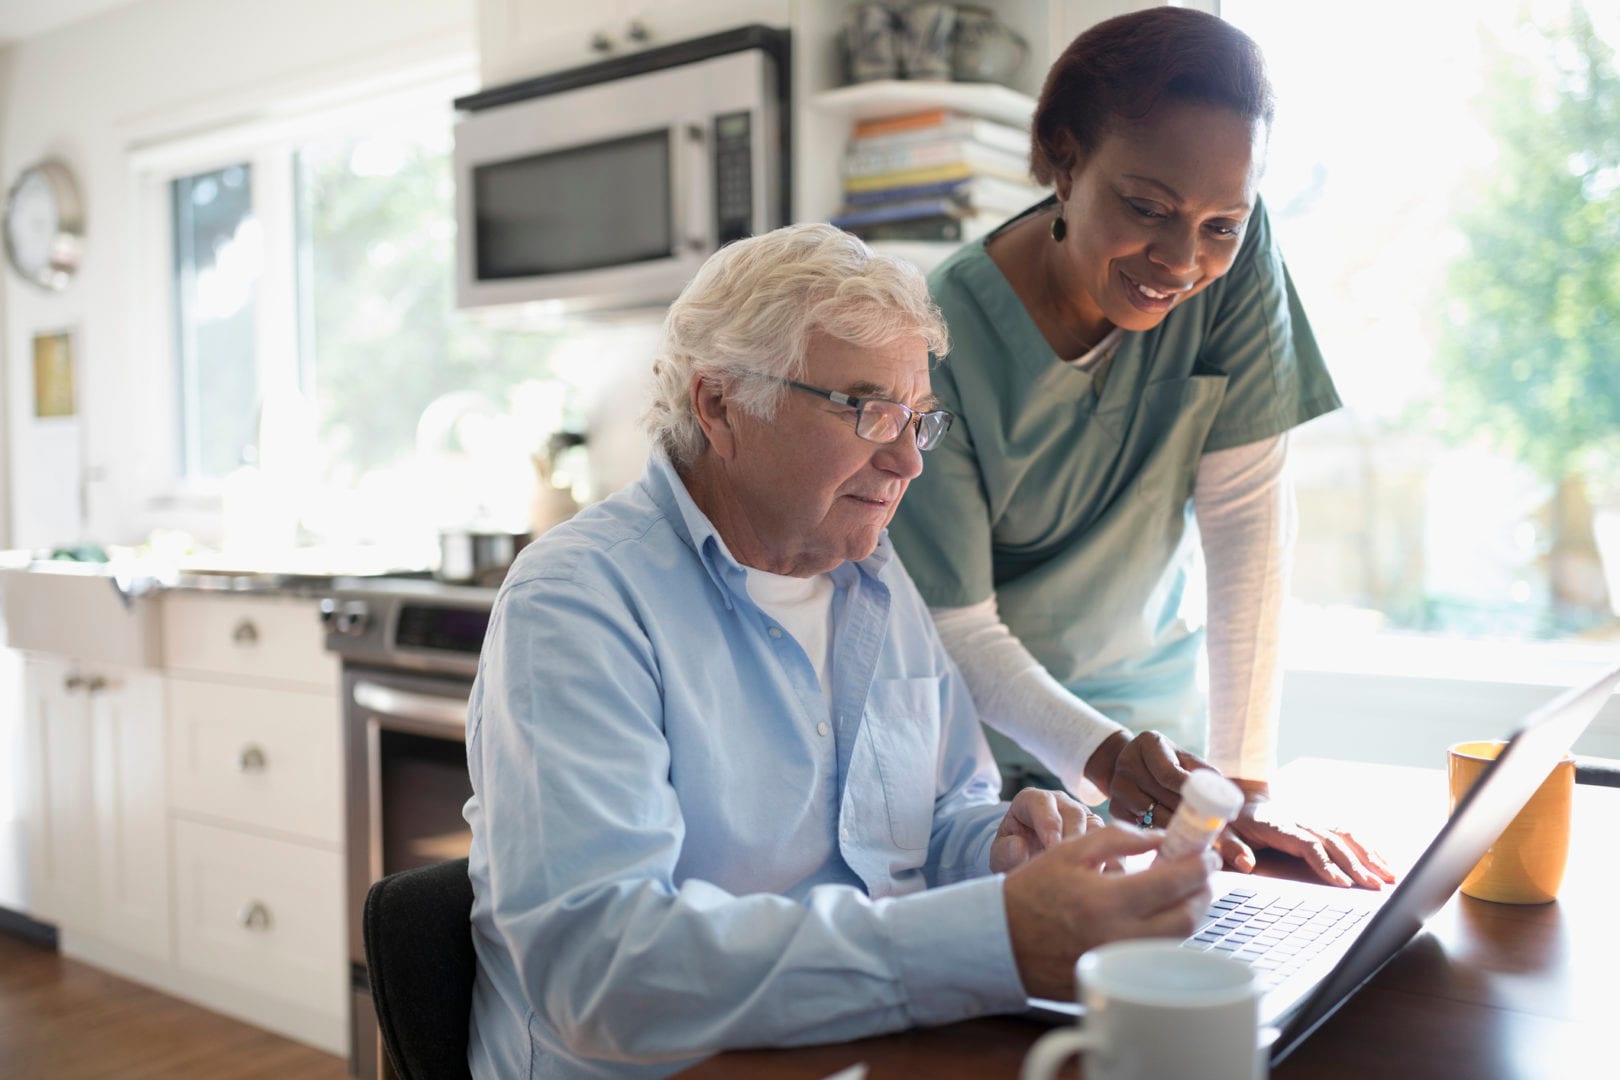 How to become a home care provider: training, pay and job prospects